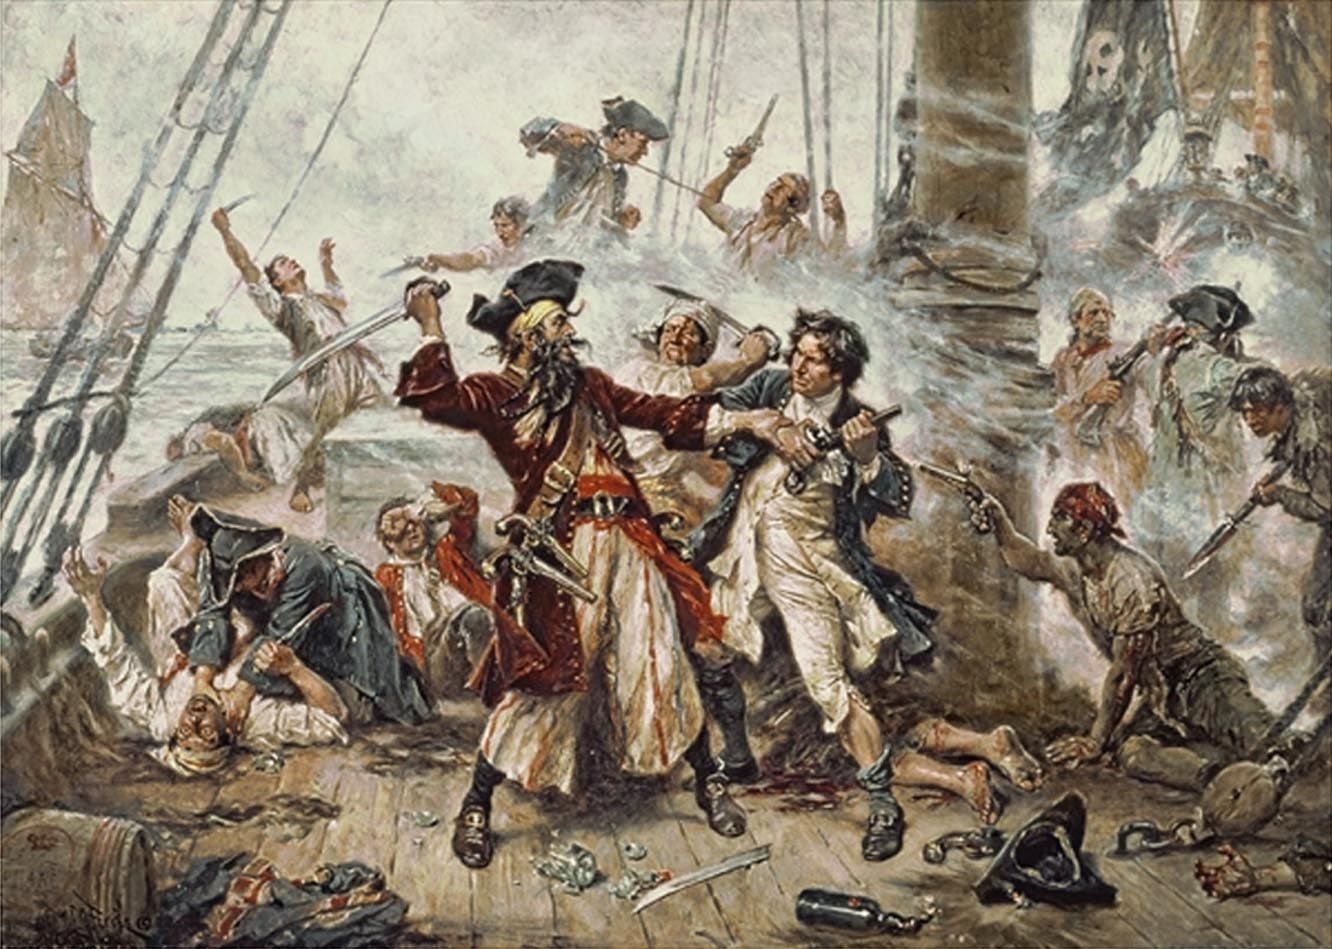 The Golden Age of Piracy: Exploring the Infamous 19th Century Pirates